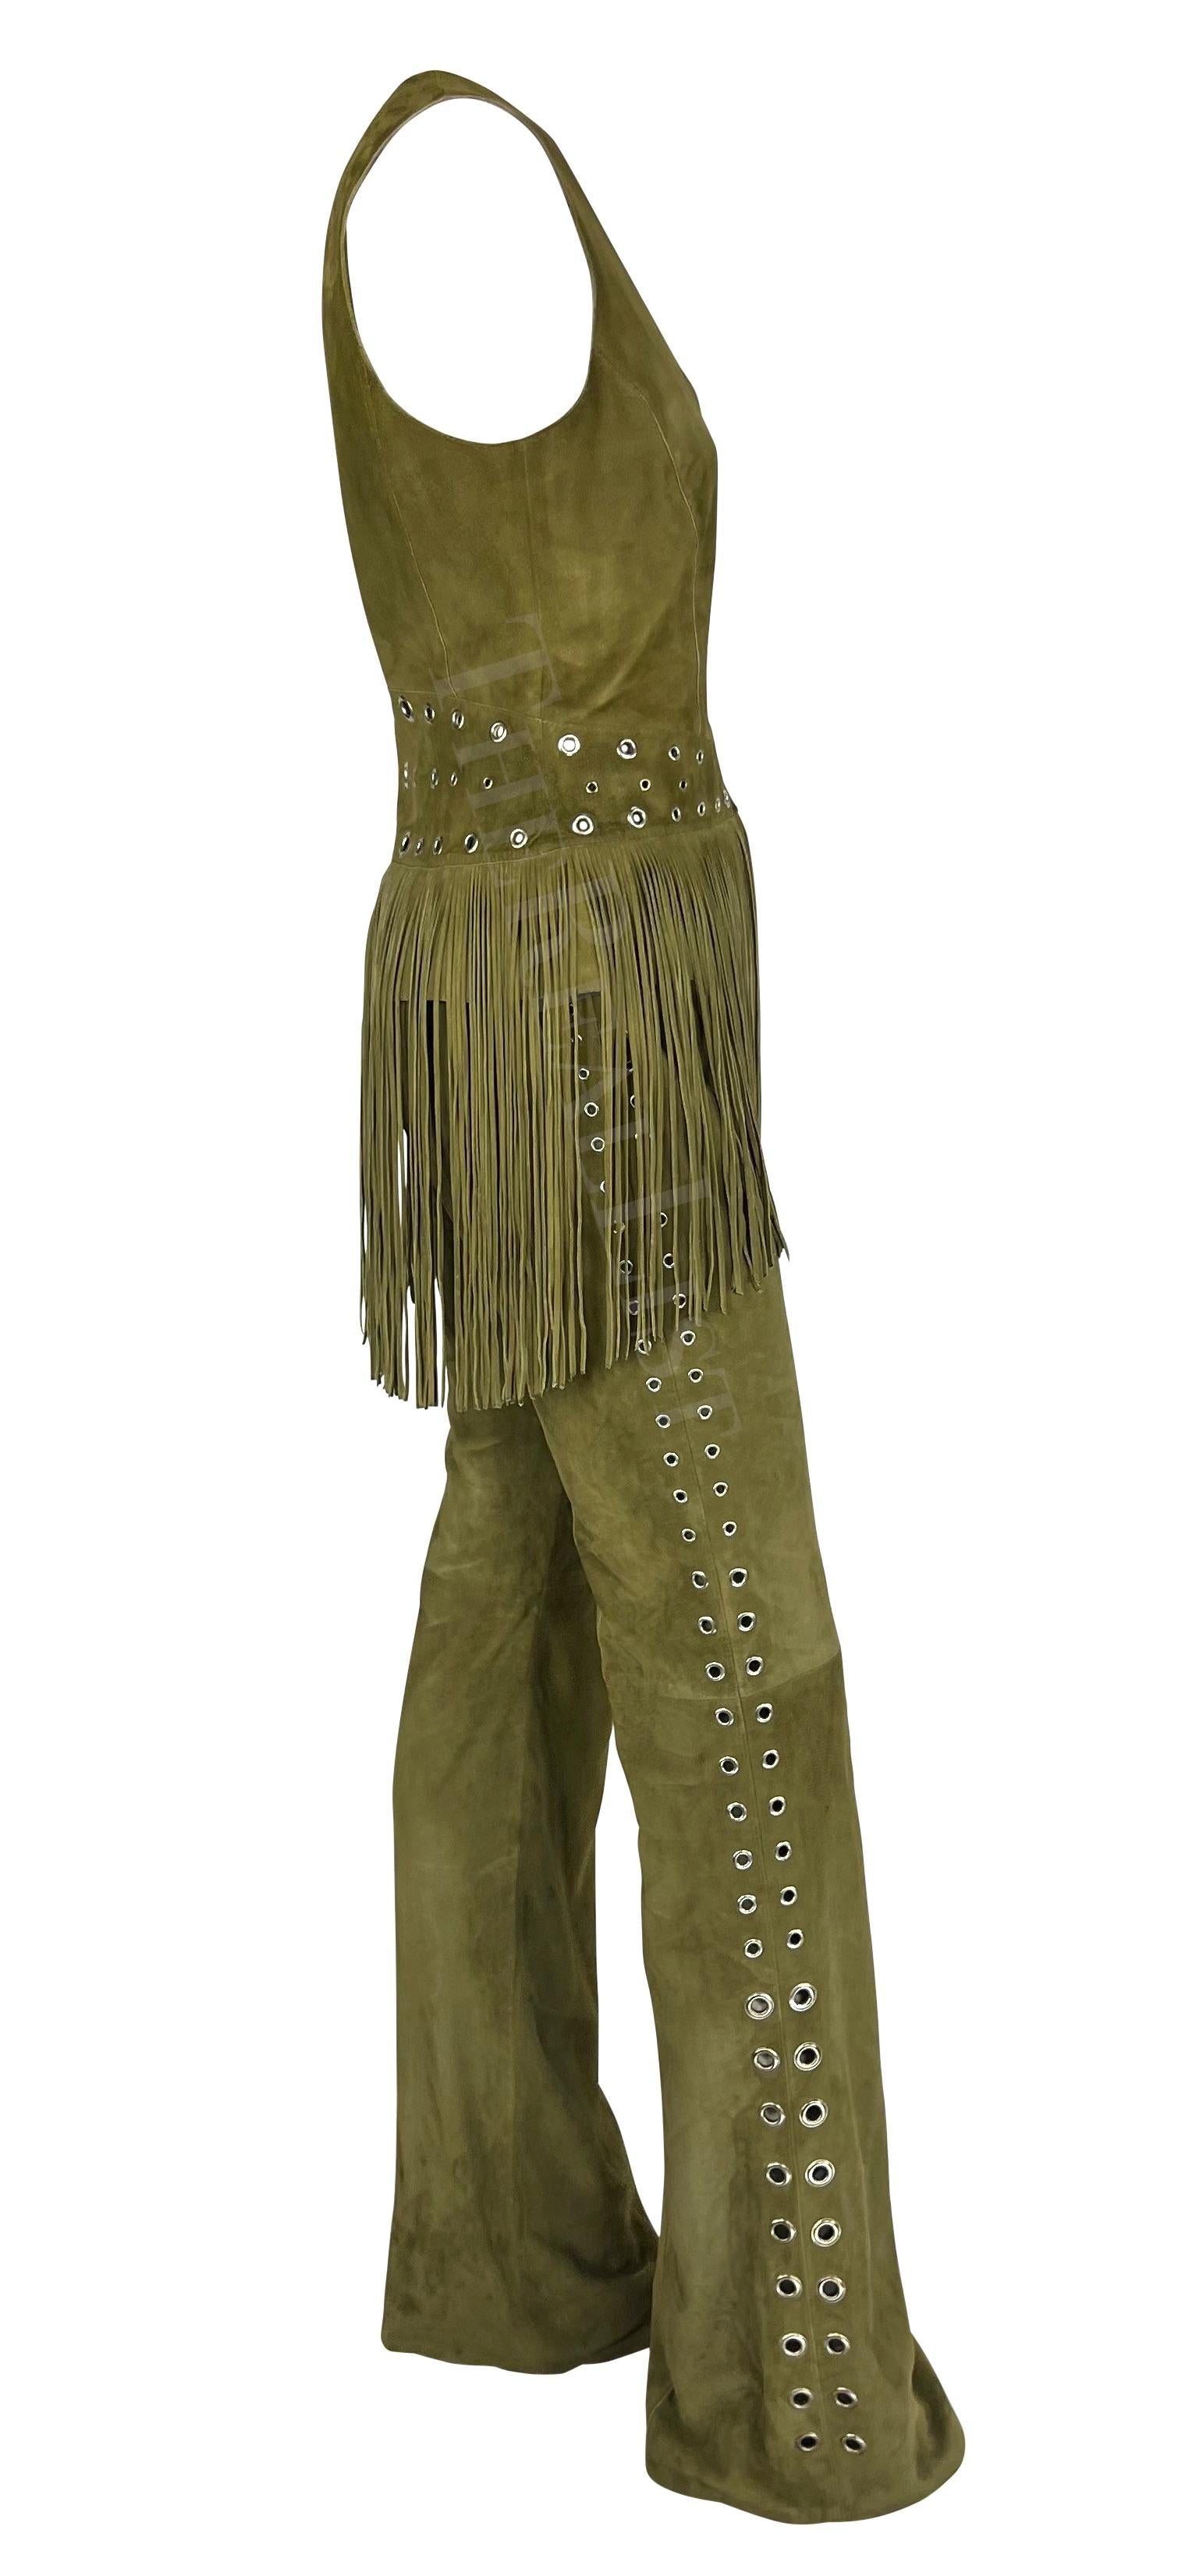 Presenting an olive green suede Thierry Mugler vest and pant set, designed by Manfred Mugler. From the early 2000s, both the pants and vest are accented with silver-tone grommets. The pants feature a flared cut with grommets on either leg that